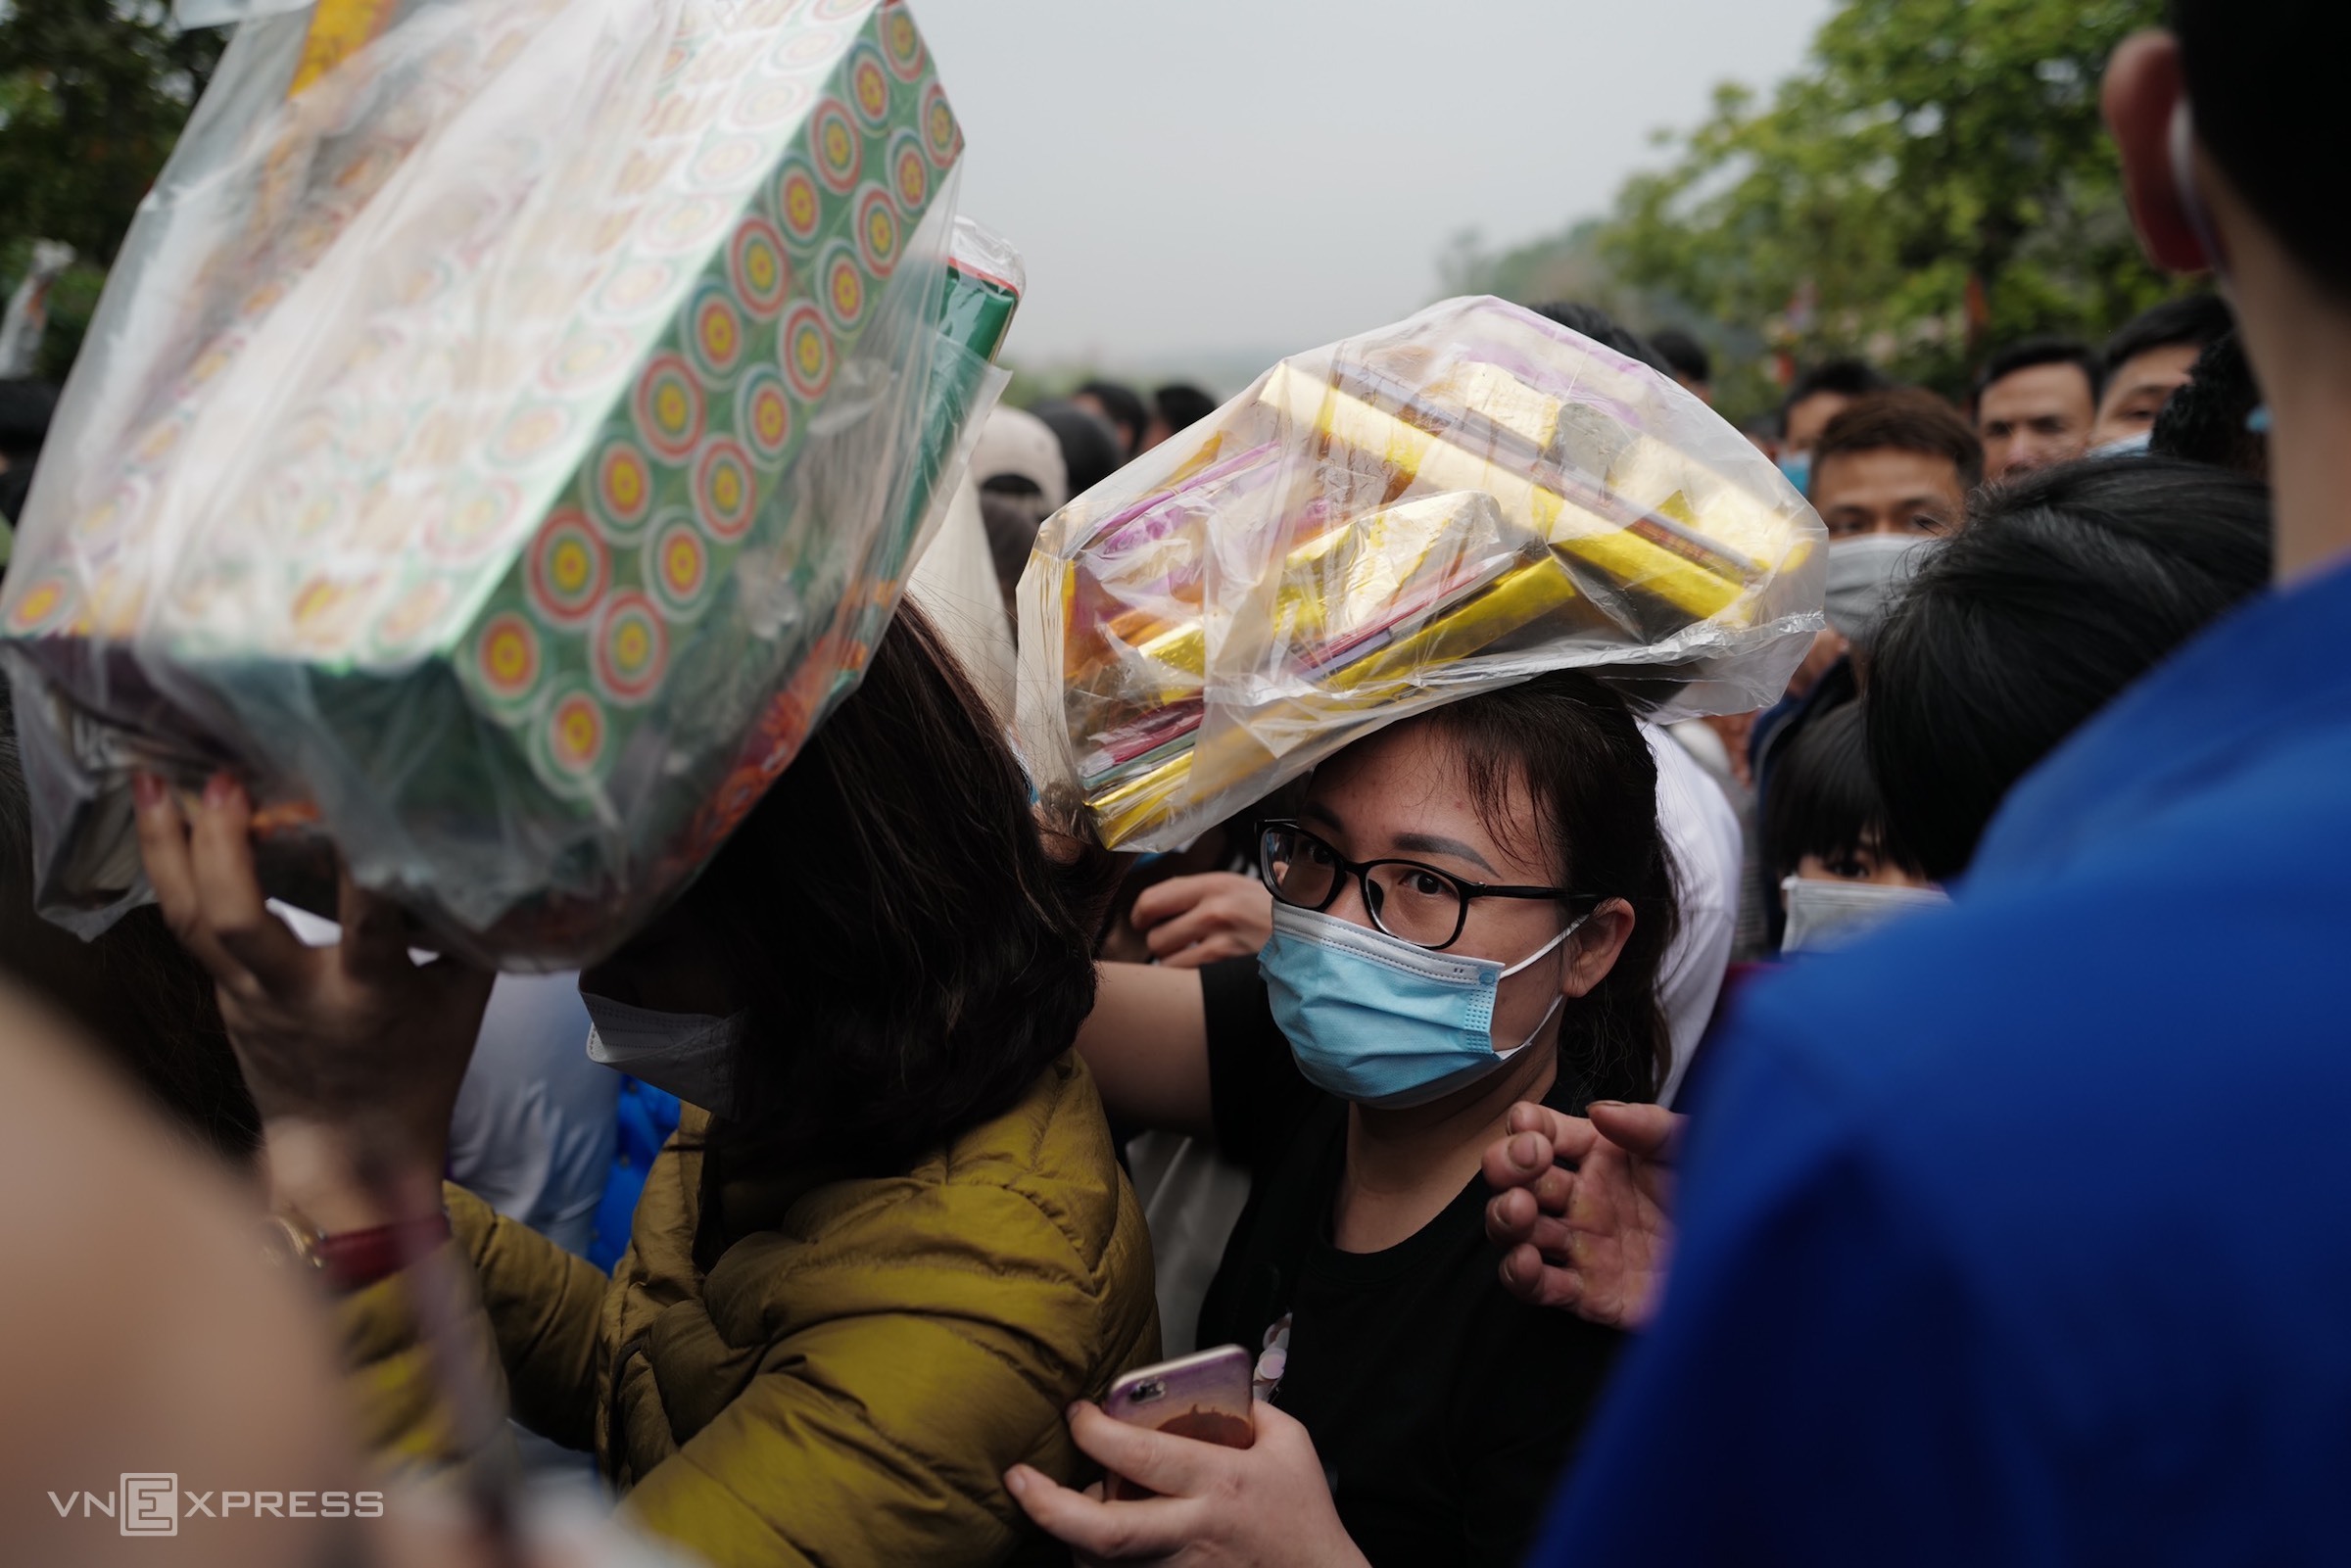 Two women carry offerings on their heads as they tried to weave their way through the crowd. Many people set up camps to stay overnight inside the temple area or at the foot of Nghia Linh Mountain for the main ceremony that takes place Sunday.